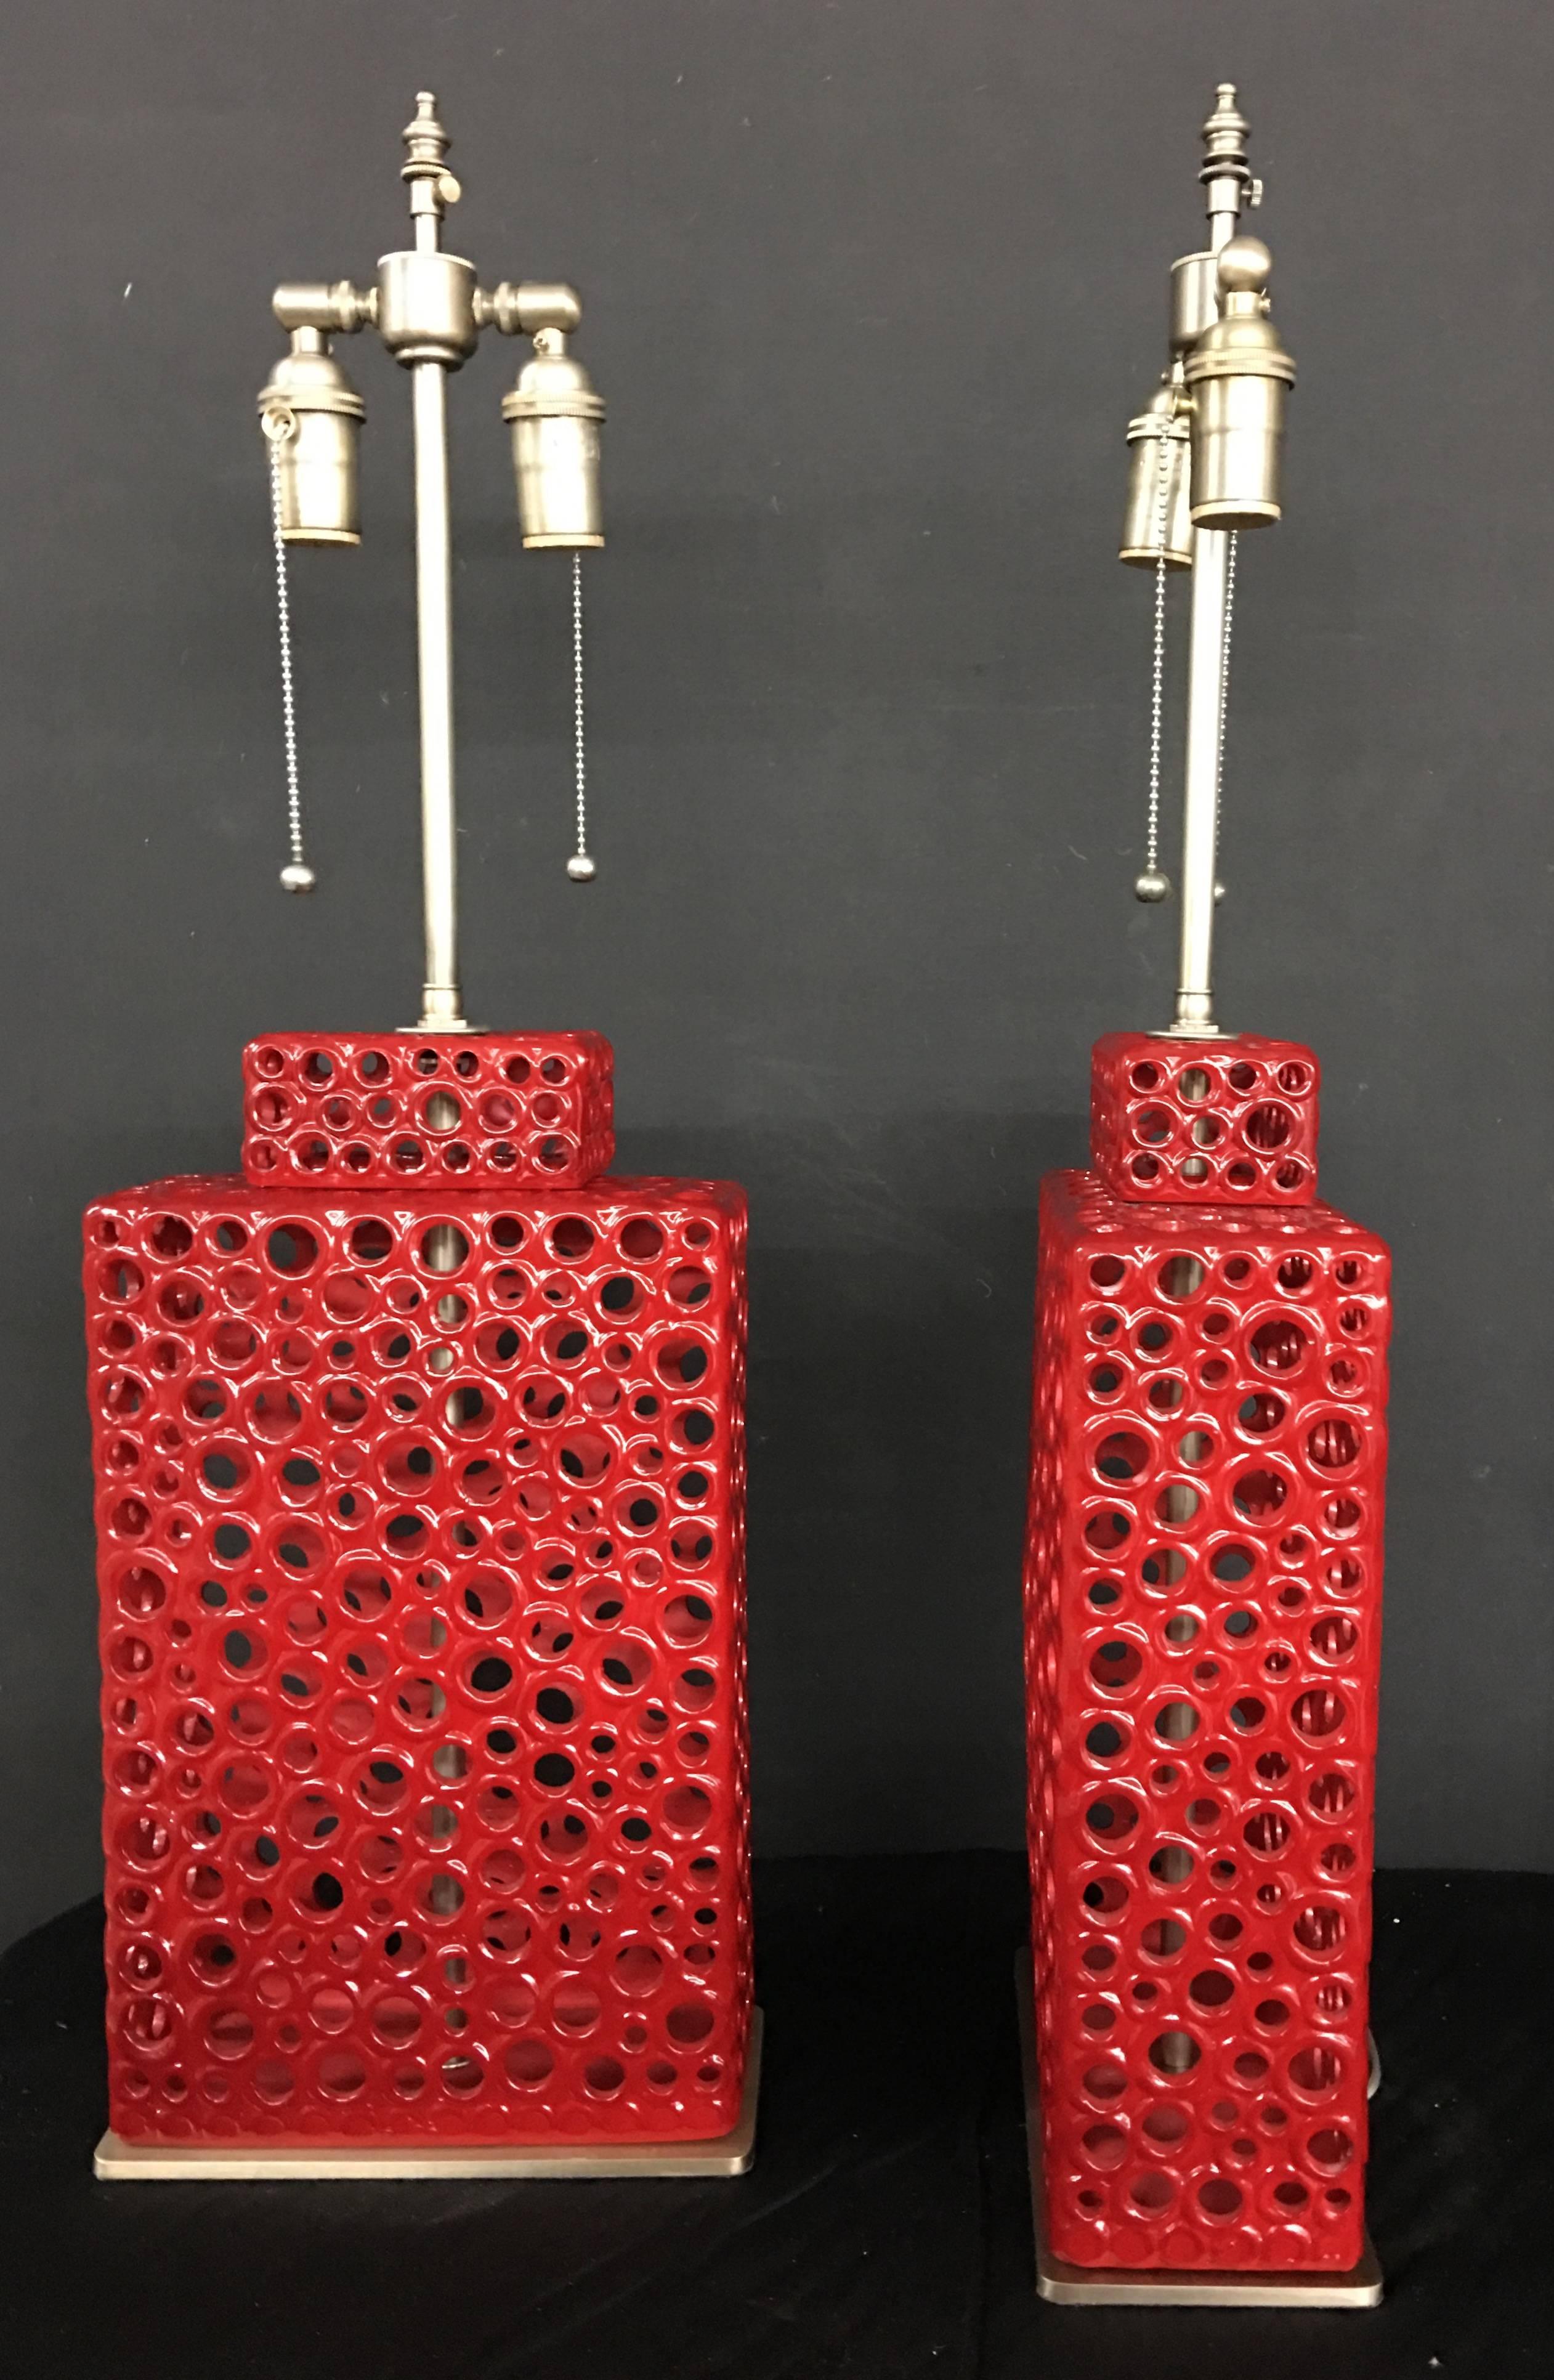 Unique pair of red ceramic vessels with lamp application. The lamps are newly wired, the hardware is brushed nickel with individually controlled dual sockets. The base is in matching brushed nickel. The vessels are 17